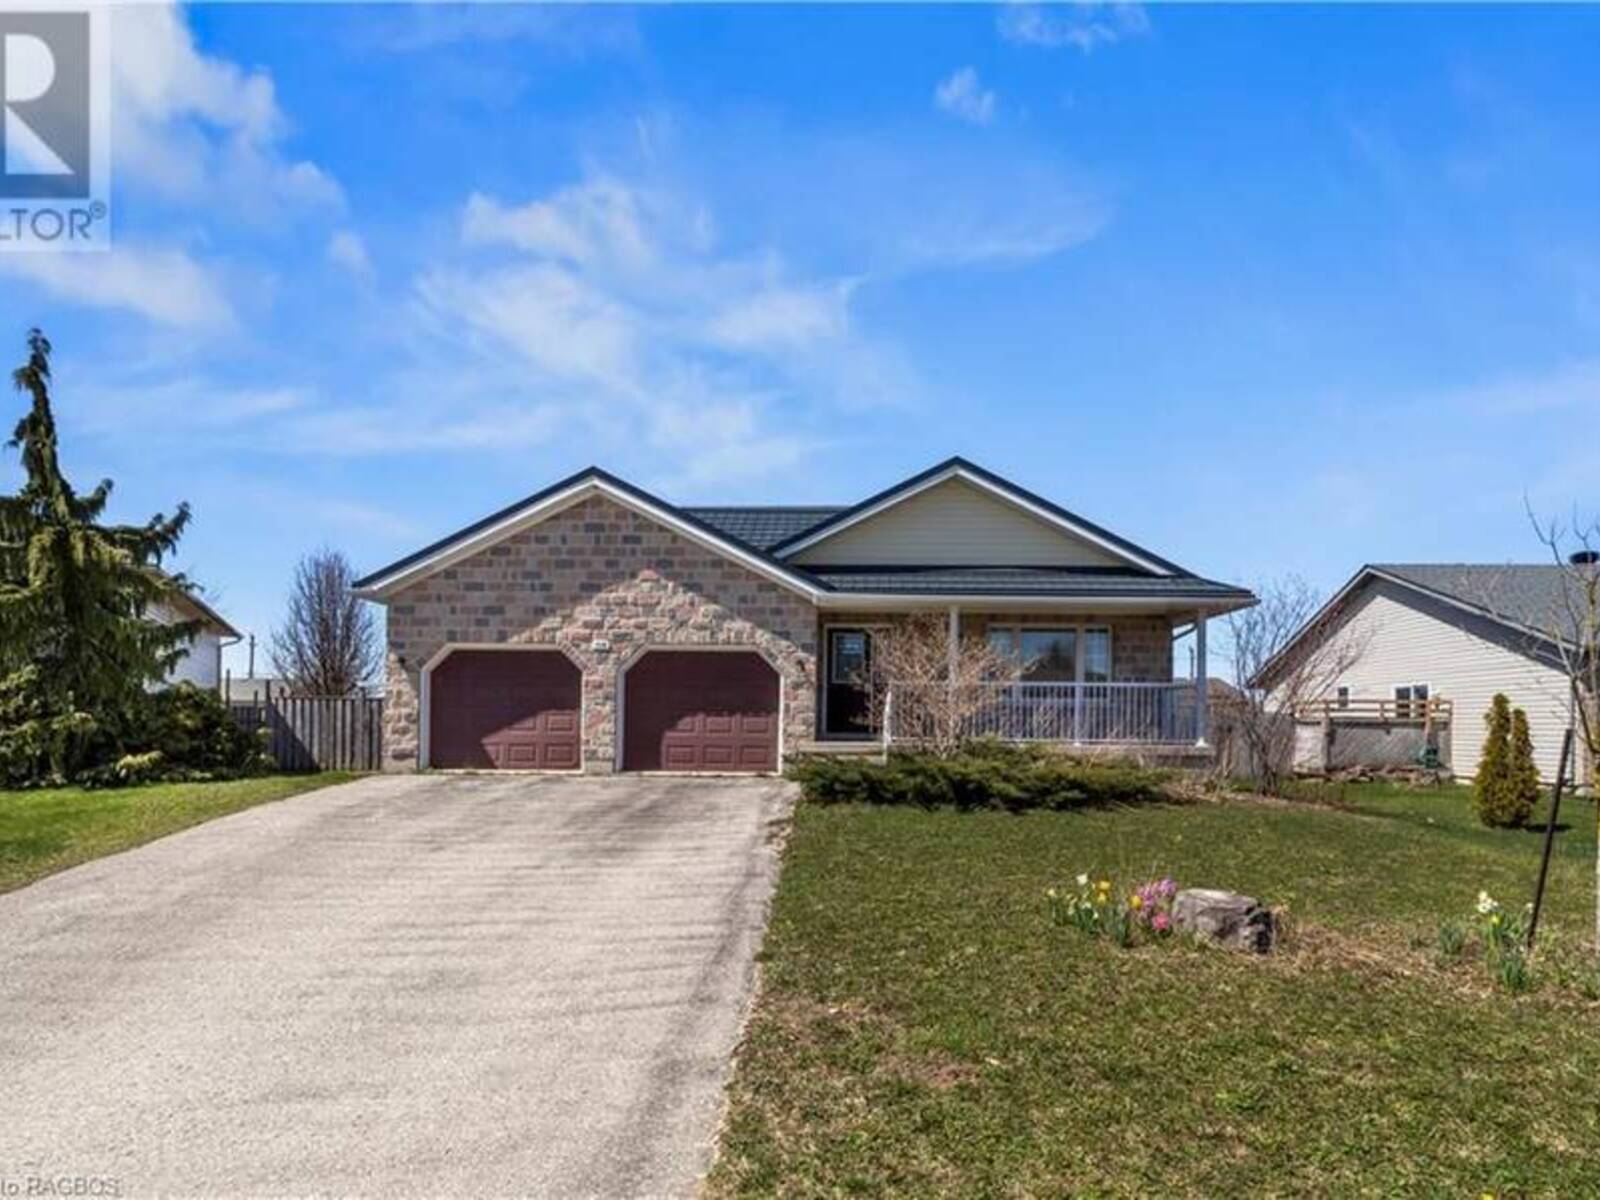 115 CONNERY Road, Mount Forest, Ontario N0G 2L2